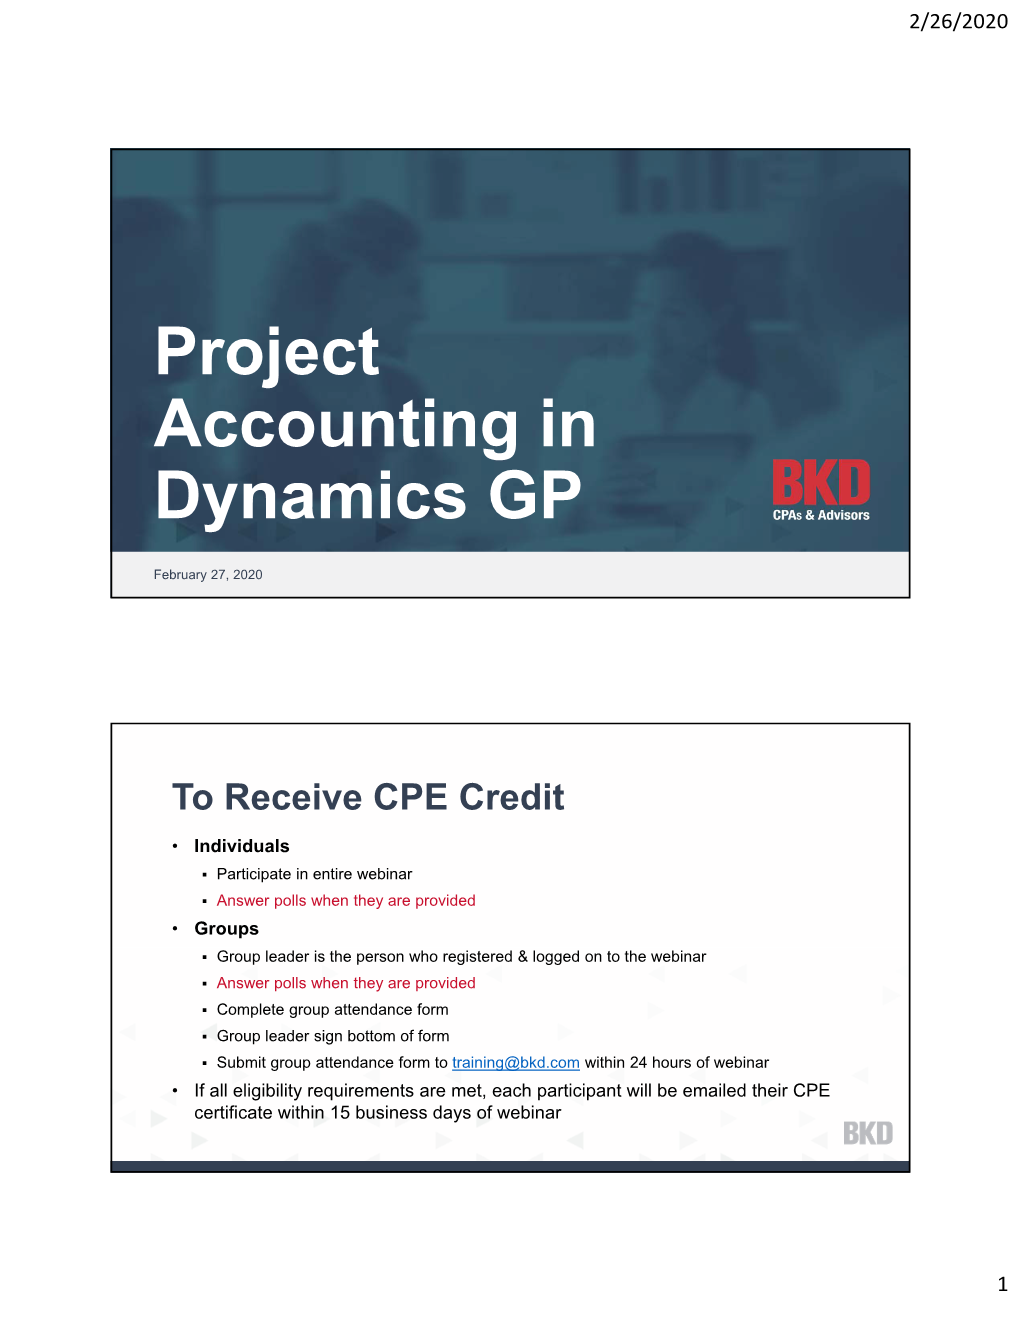 Project Accounting in Dynamics GP